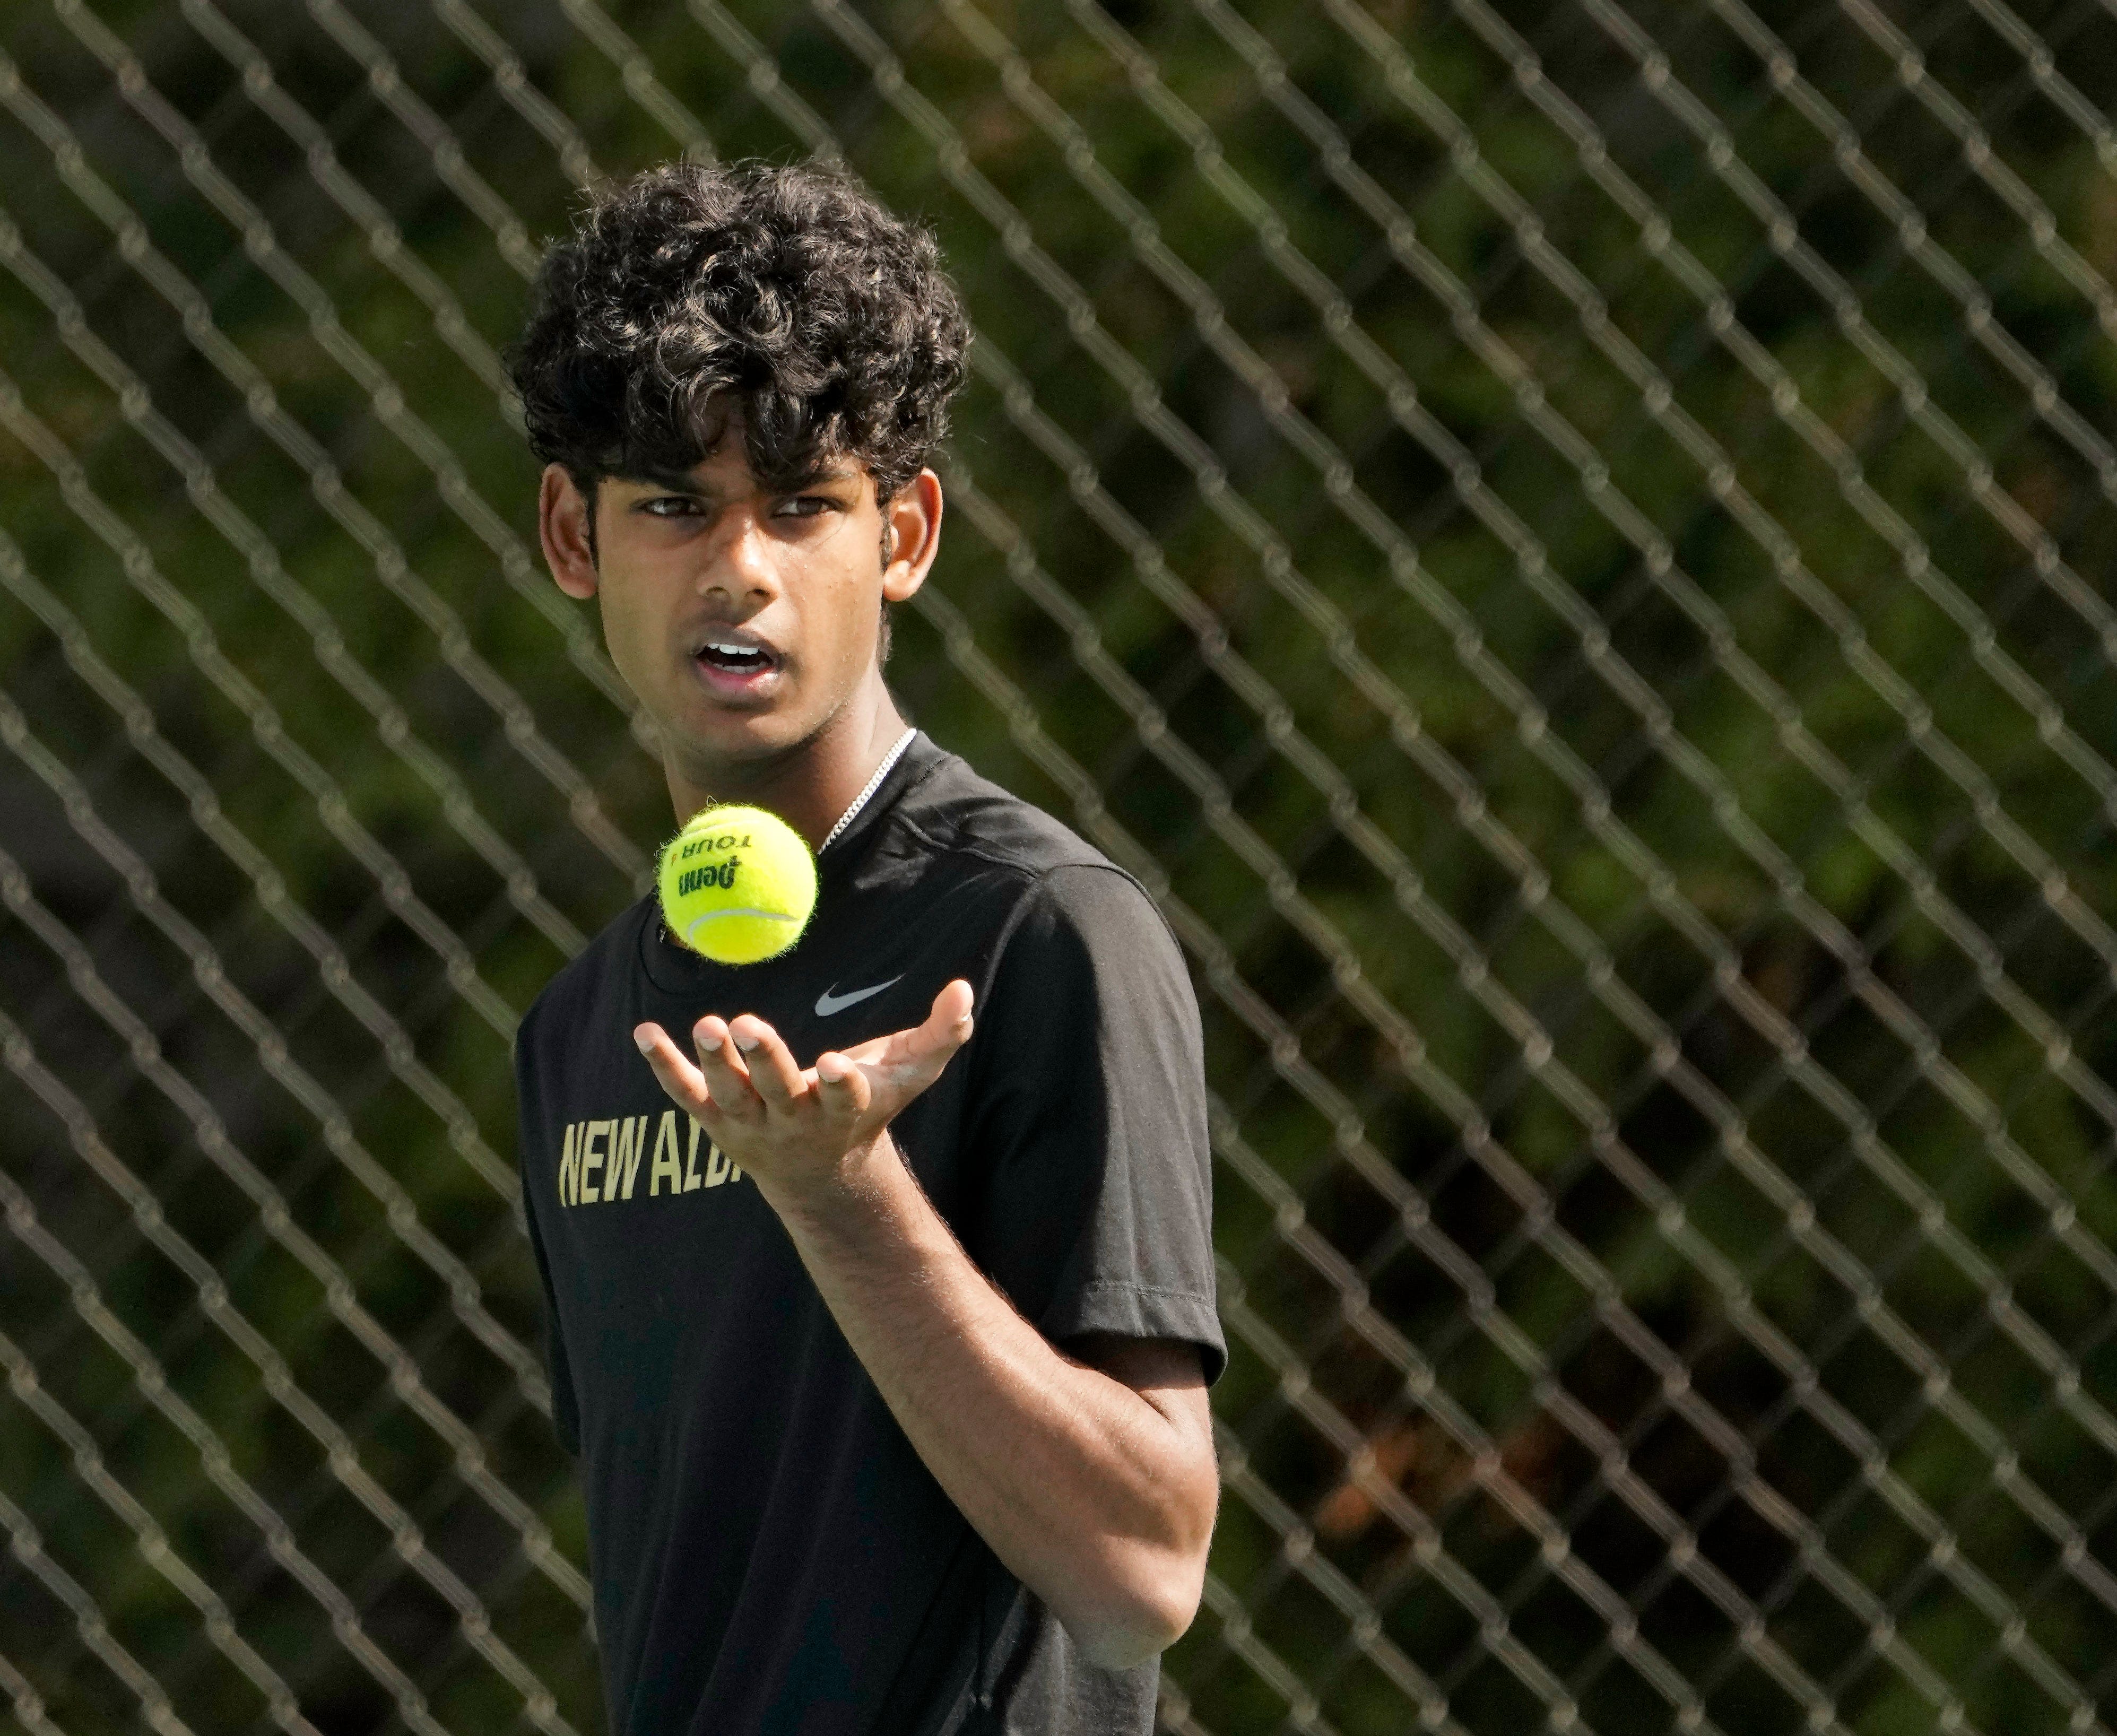 Central Ohio boys tennis players close in on OHSAA state championships